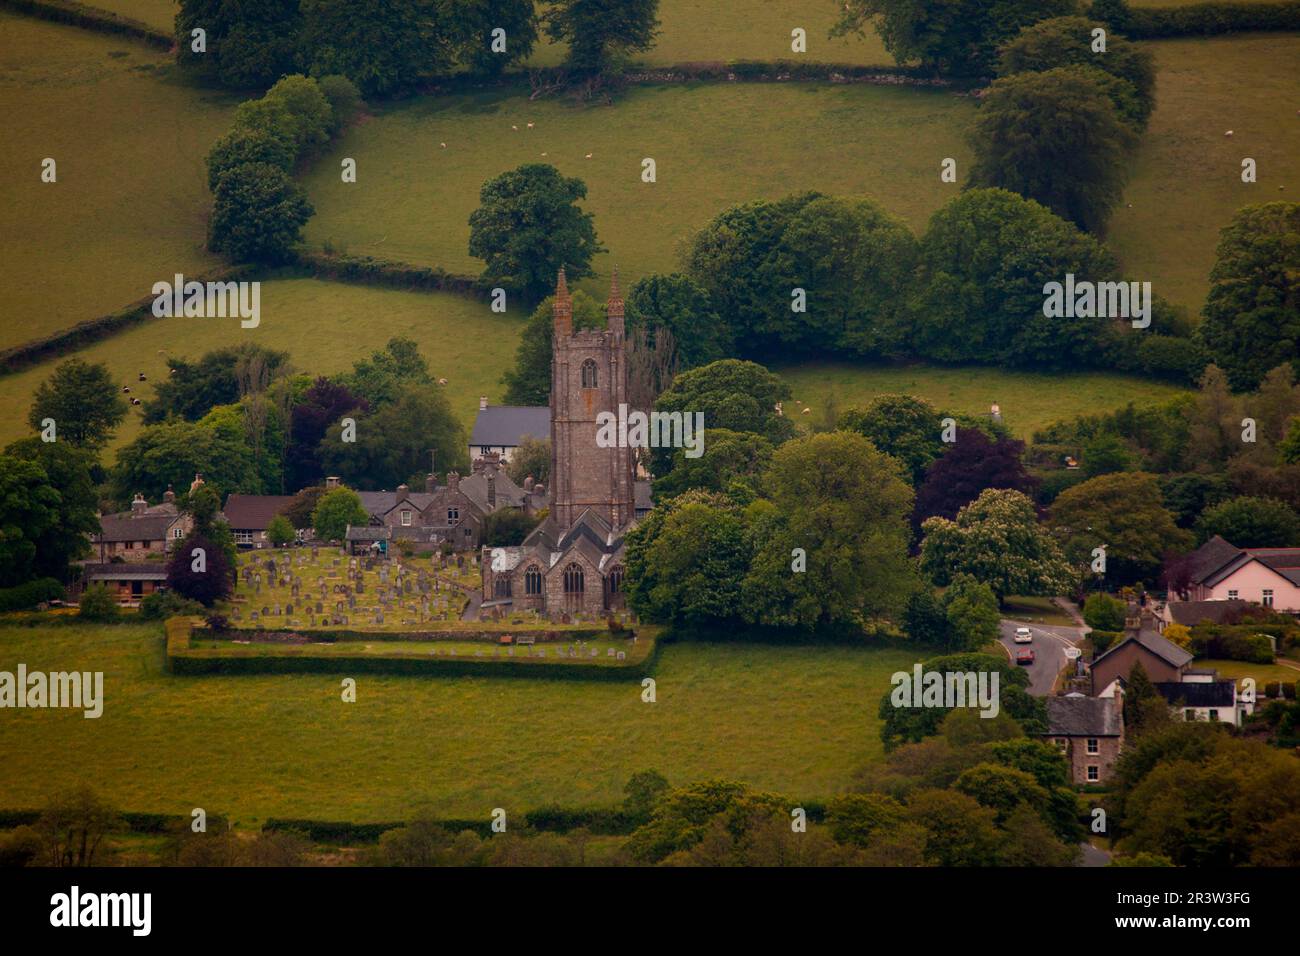 Eglise, Widecombe in the Moor, Dartmoor, Devon, Angleterre, Royaume-Uni Banque D'Images